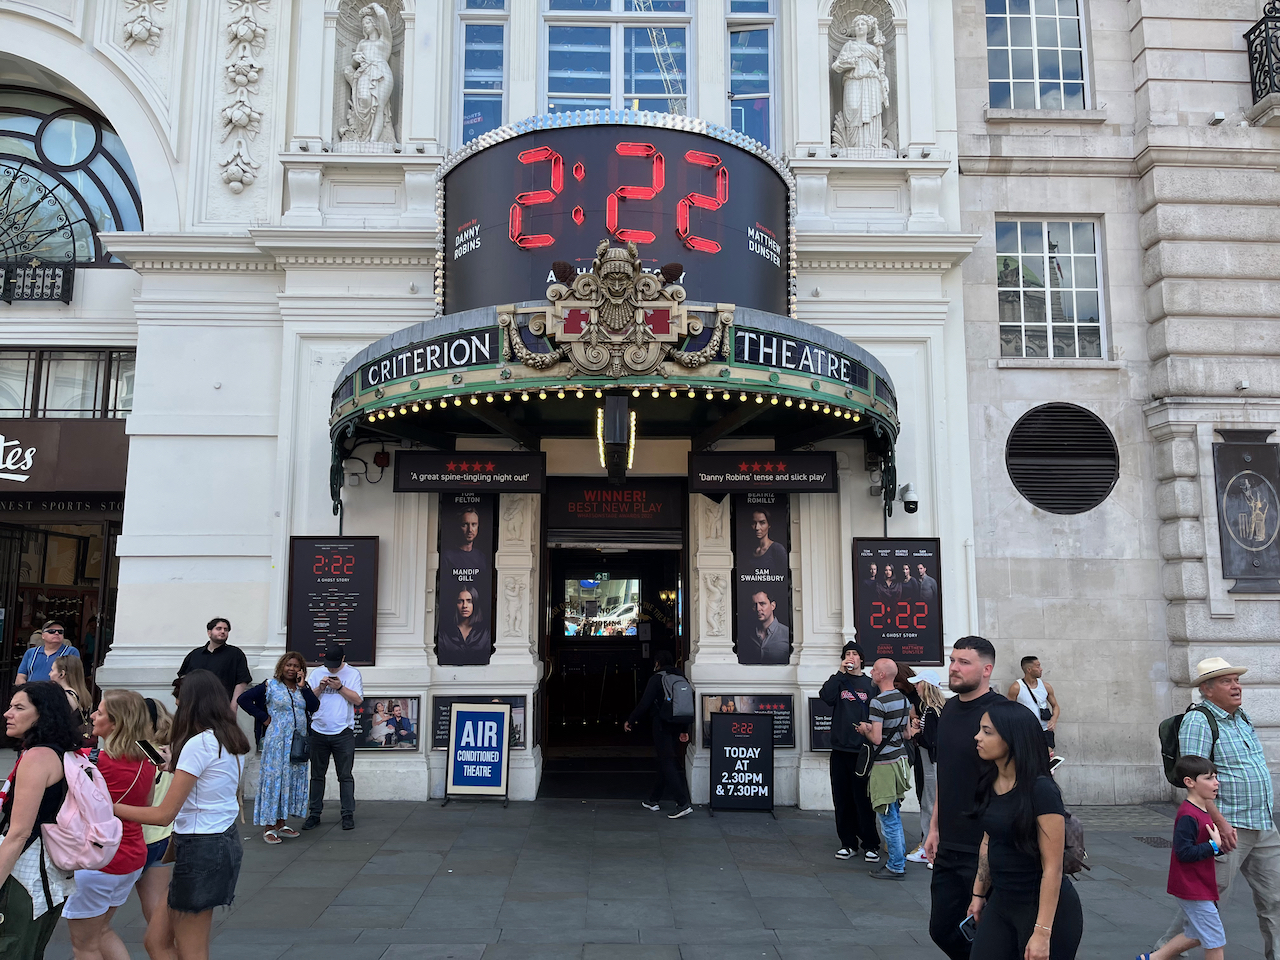 The exterior of the Criterion Theatre. The curved canopy overhanging the entrance has an ornate grinning figurehead centred in between the words Criterion and Theatre. Above that, in large red numbers against black, is a digital clock face showing 2:22. Either side of the entrance doorway below, meanwhile, are vertical boards with the headshots and names of the 4 lead actors against a black background, 2 on each side.